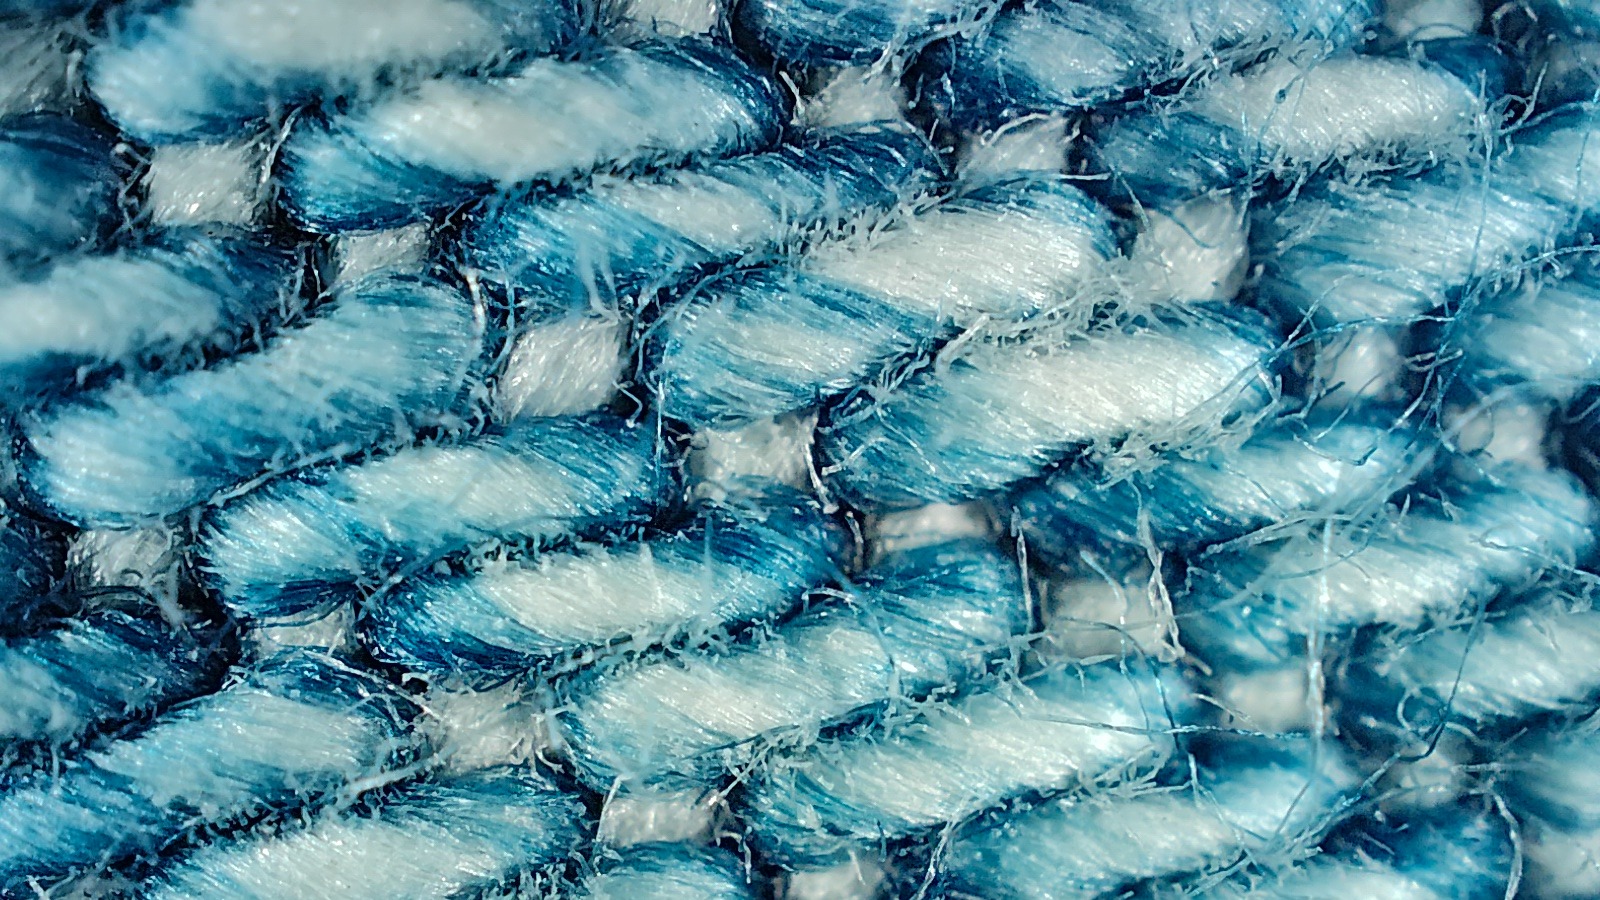 Microscopic image of a pair of jeans taken with the Realme GT 2 Pro